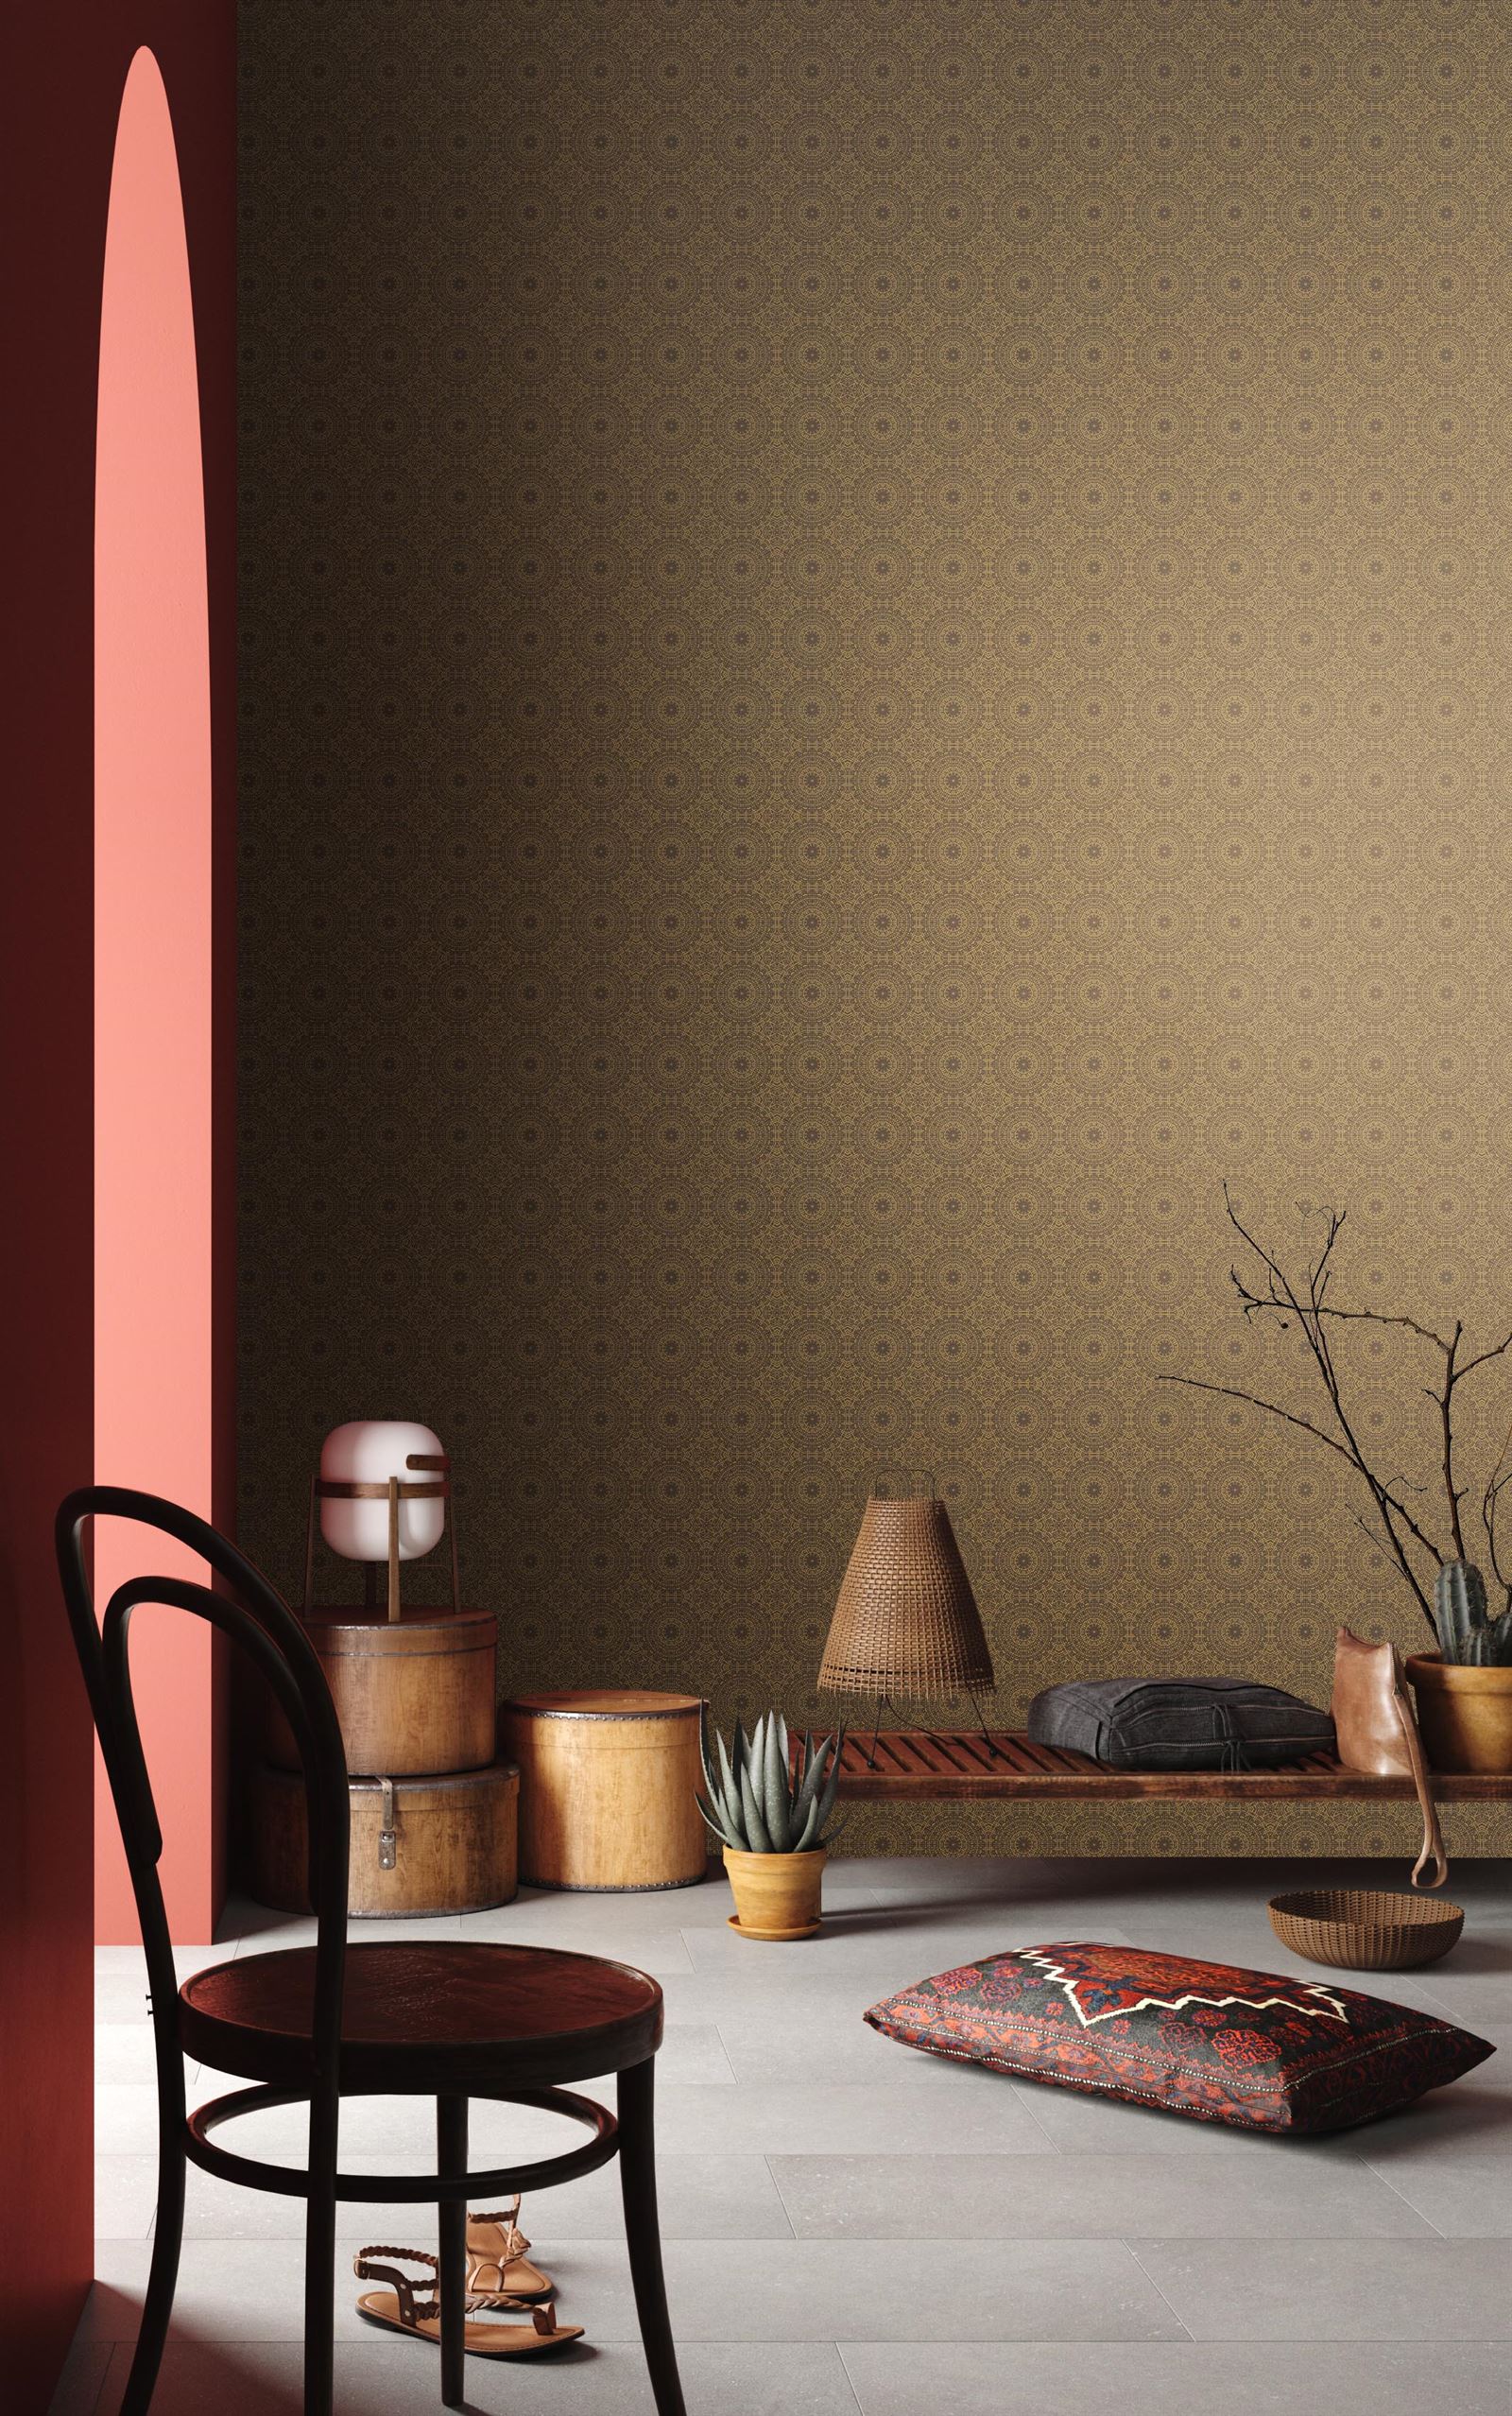 Mantelito is a lacey patterned wallcovering with metallic details